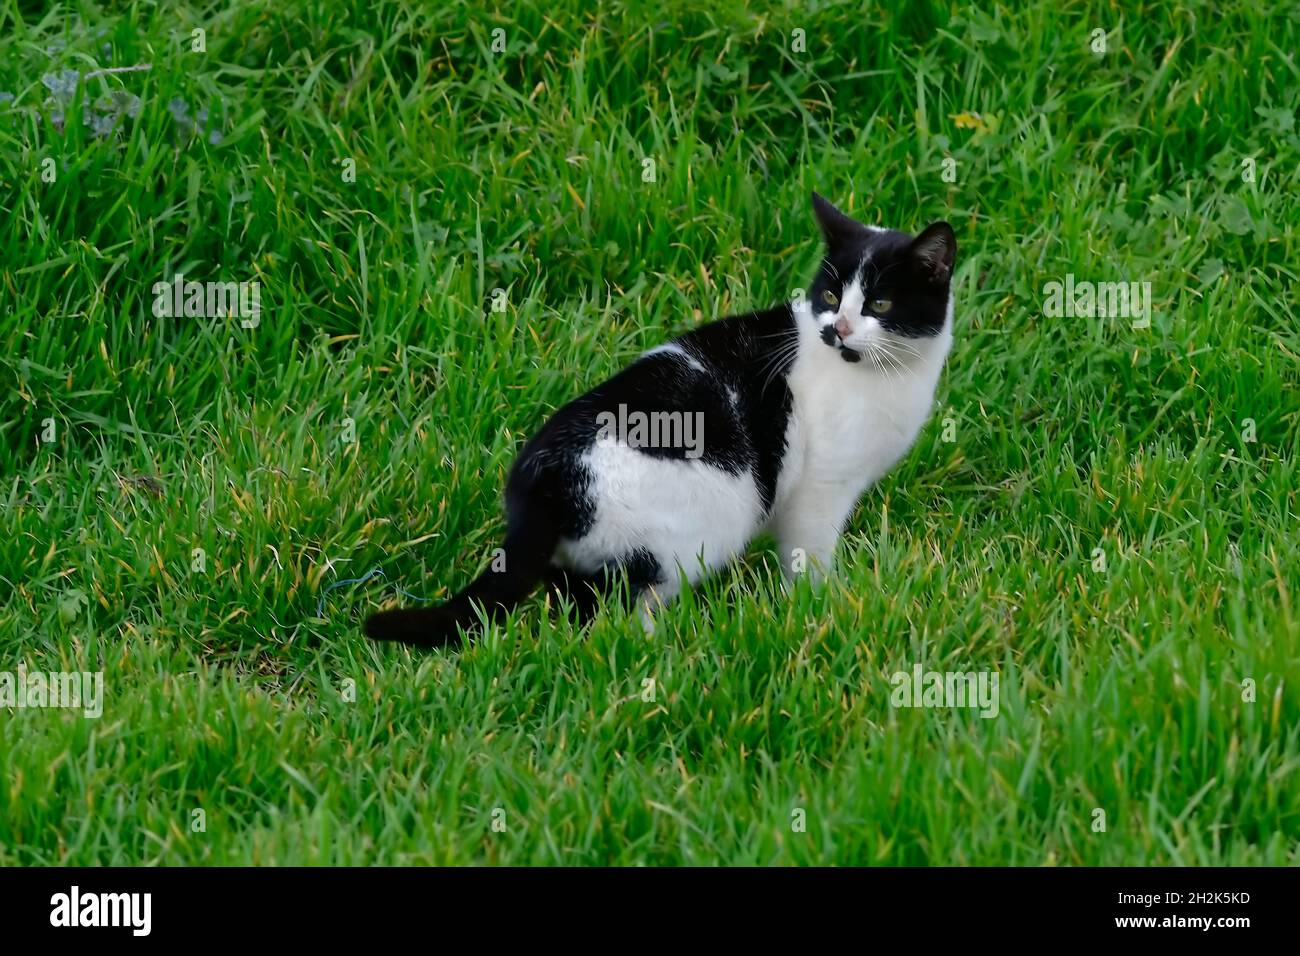 Very attentive stray cat in a green field. Stock Photo